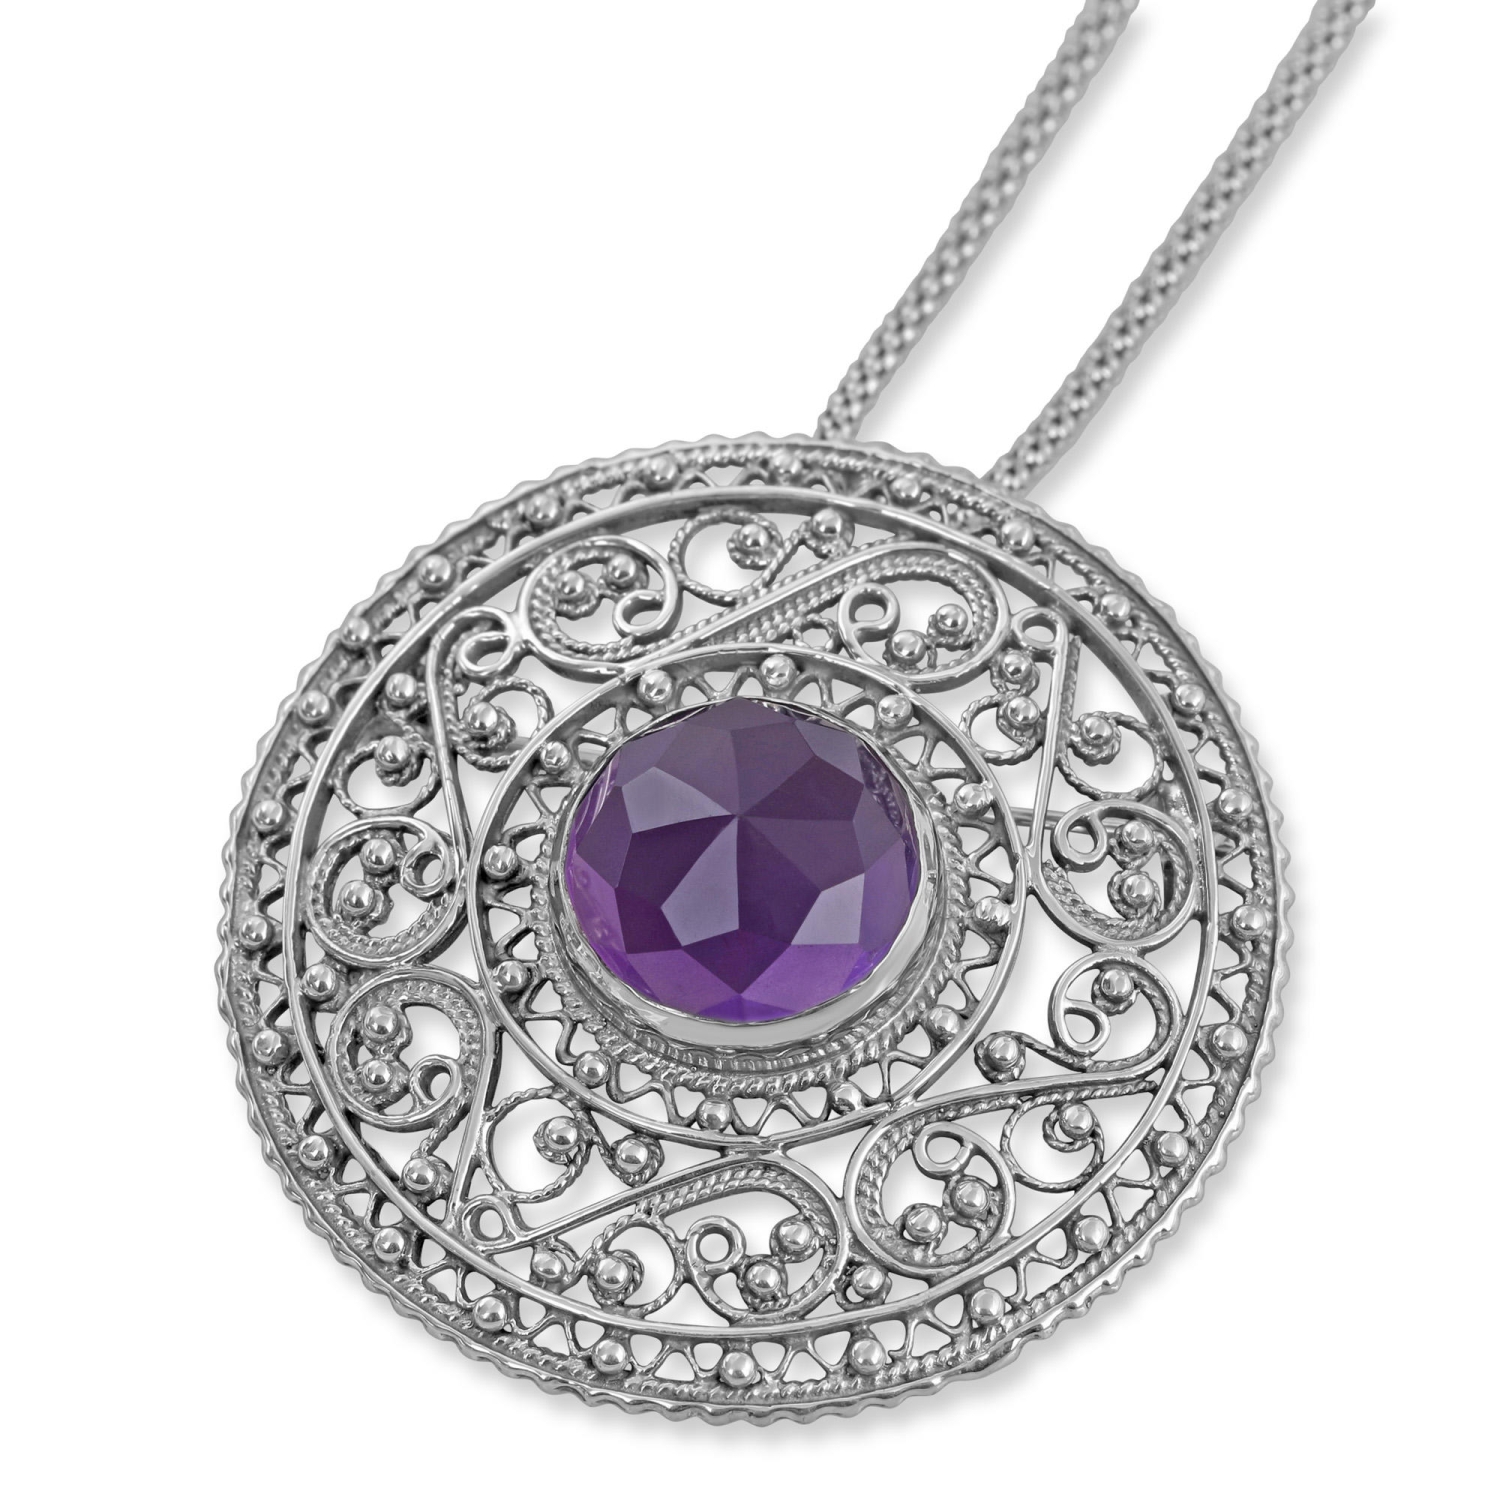 Sterling Silver Filigree Disk Necklace with Amethyst Center - 1